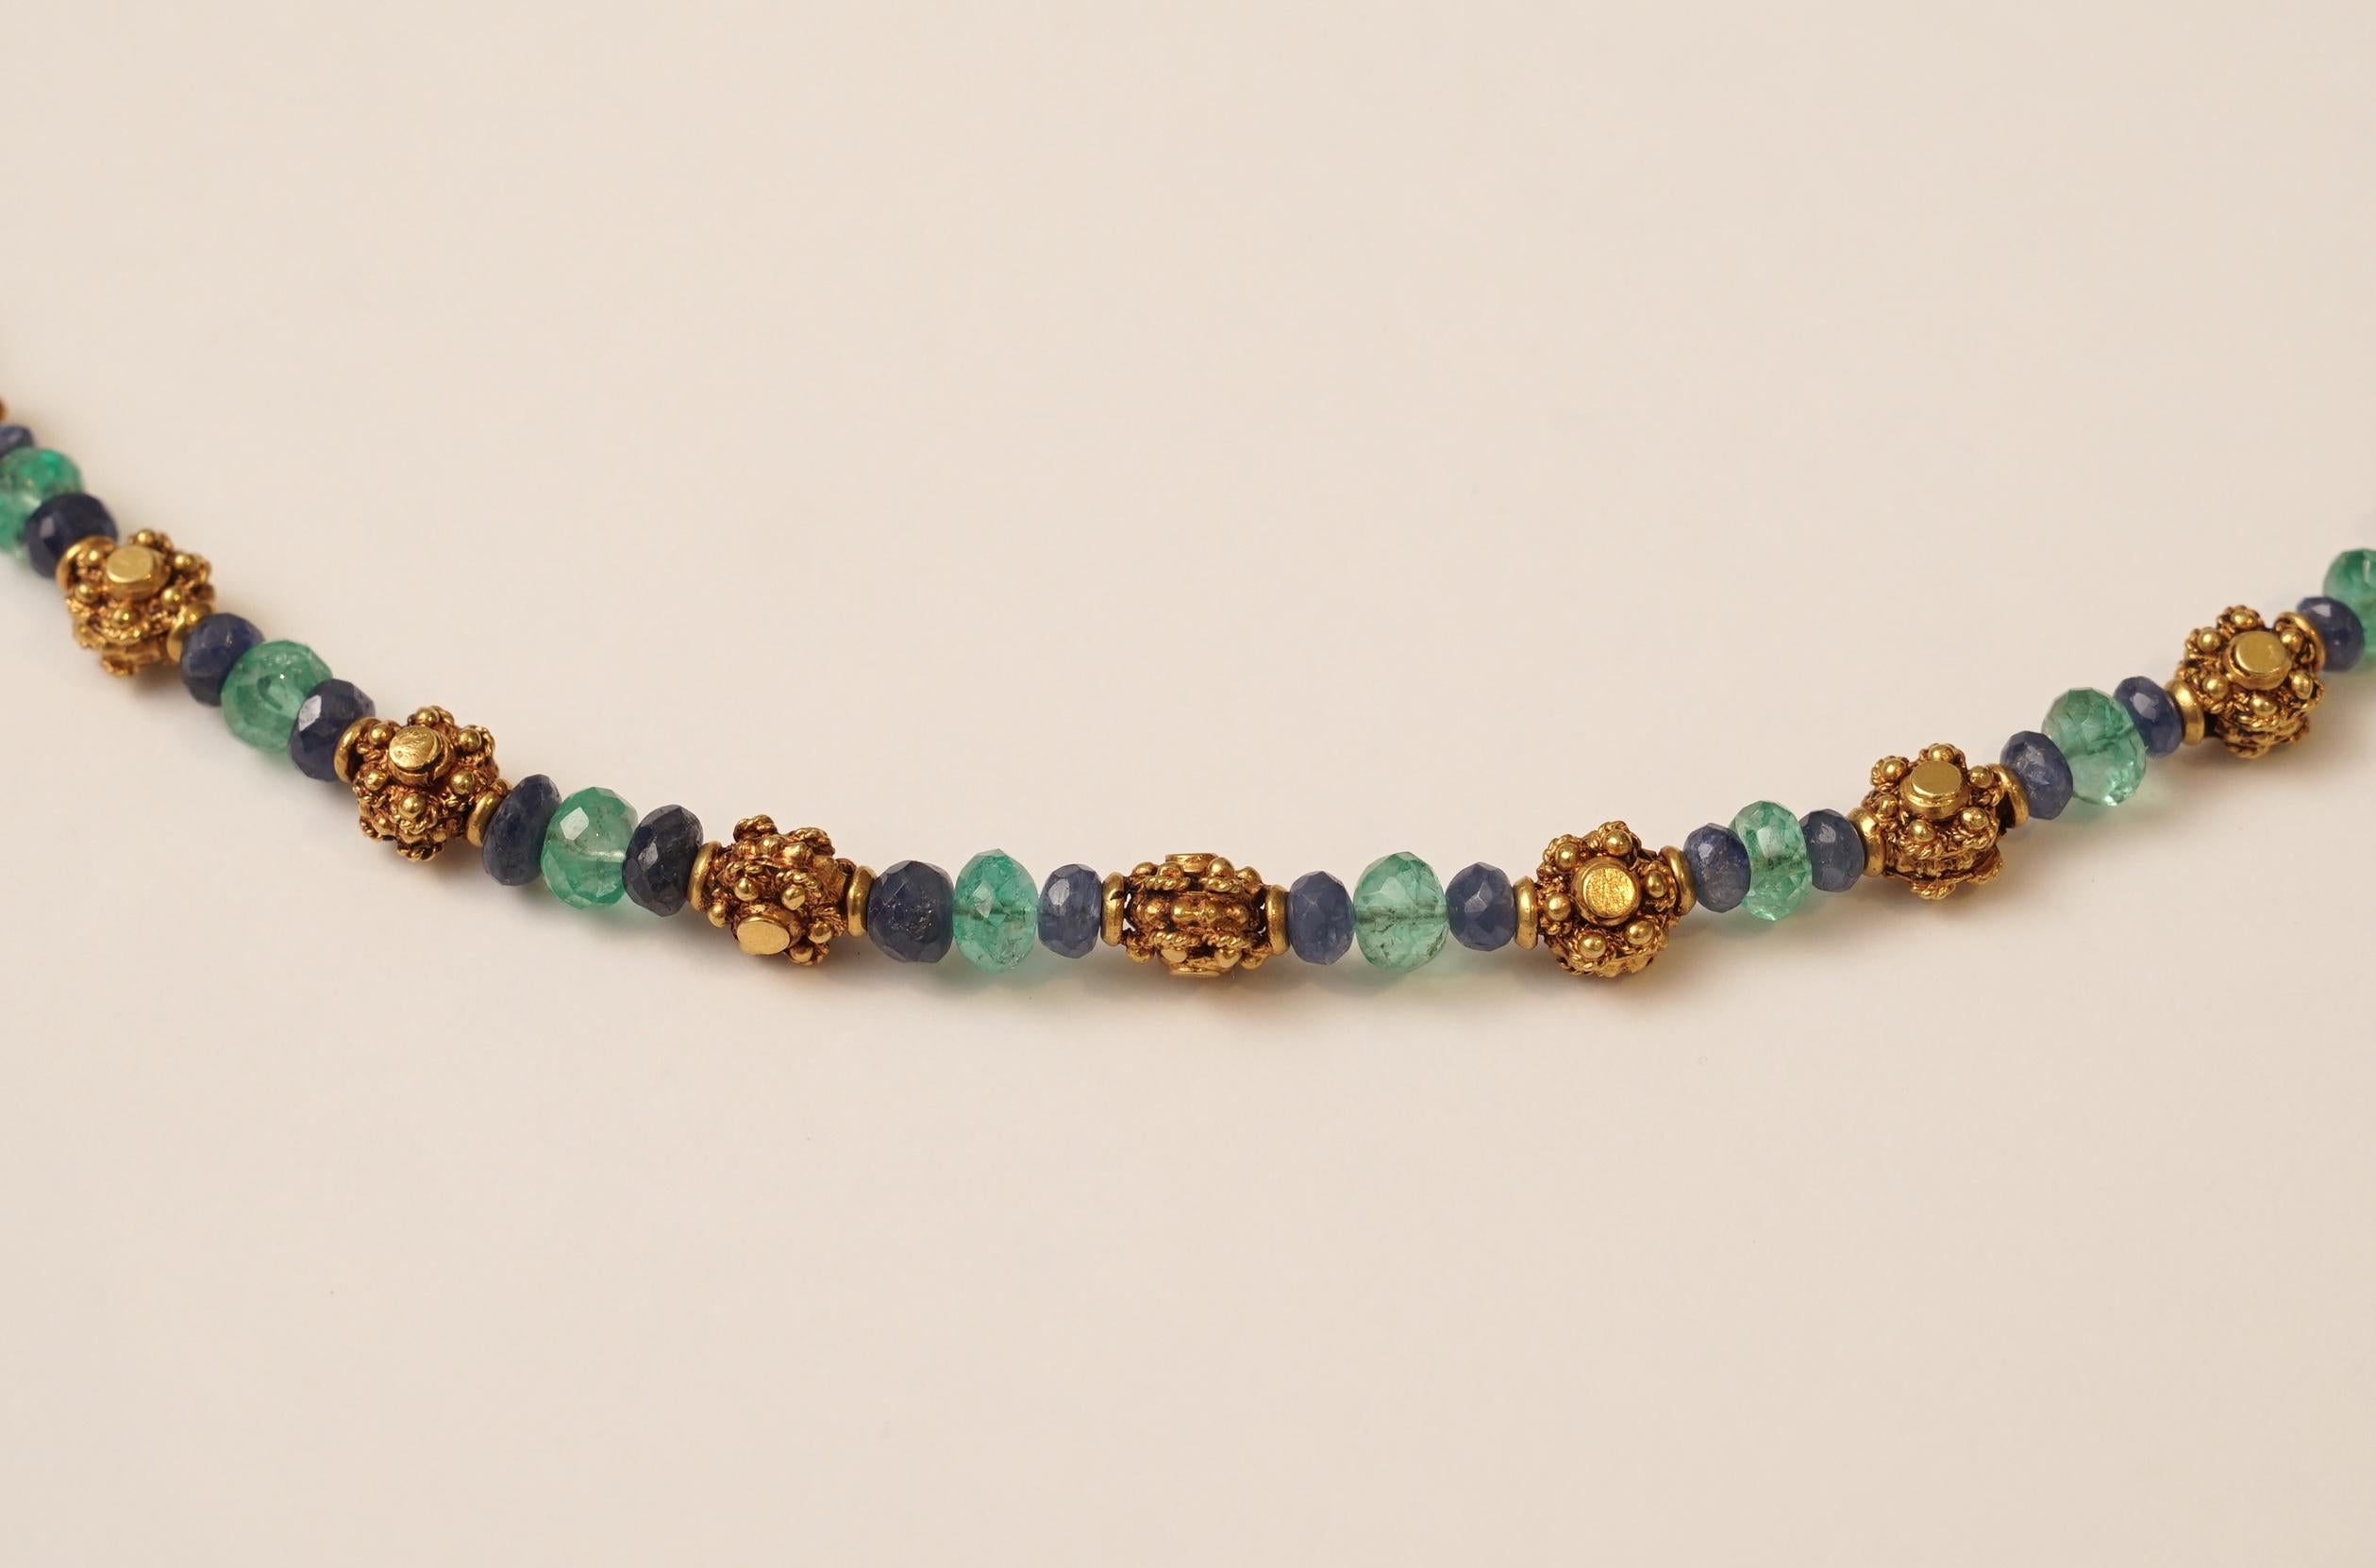 22 Karat Gold Sapphire and Emerald Necklace by Deborah Lockhart Phillips In Good Condition For Sale In Nantucket, MA